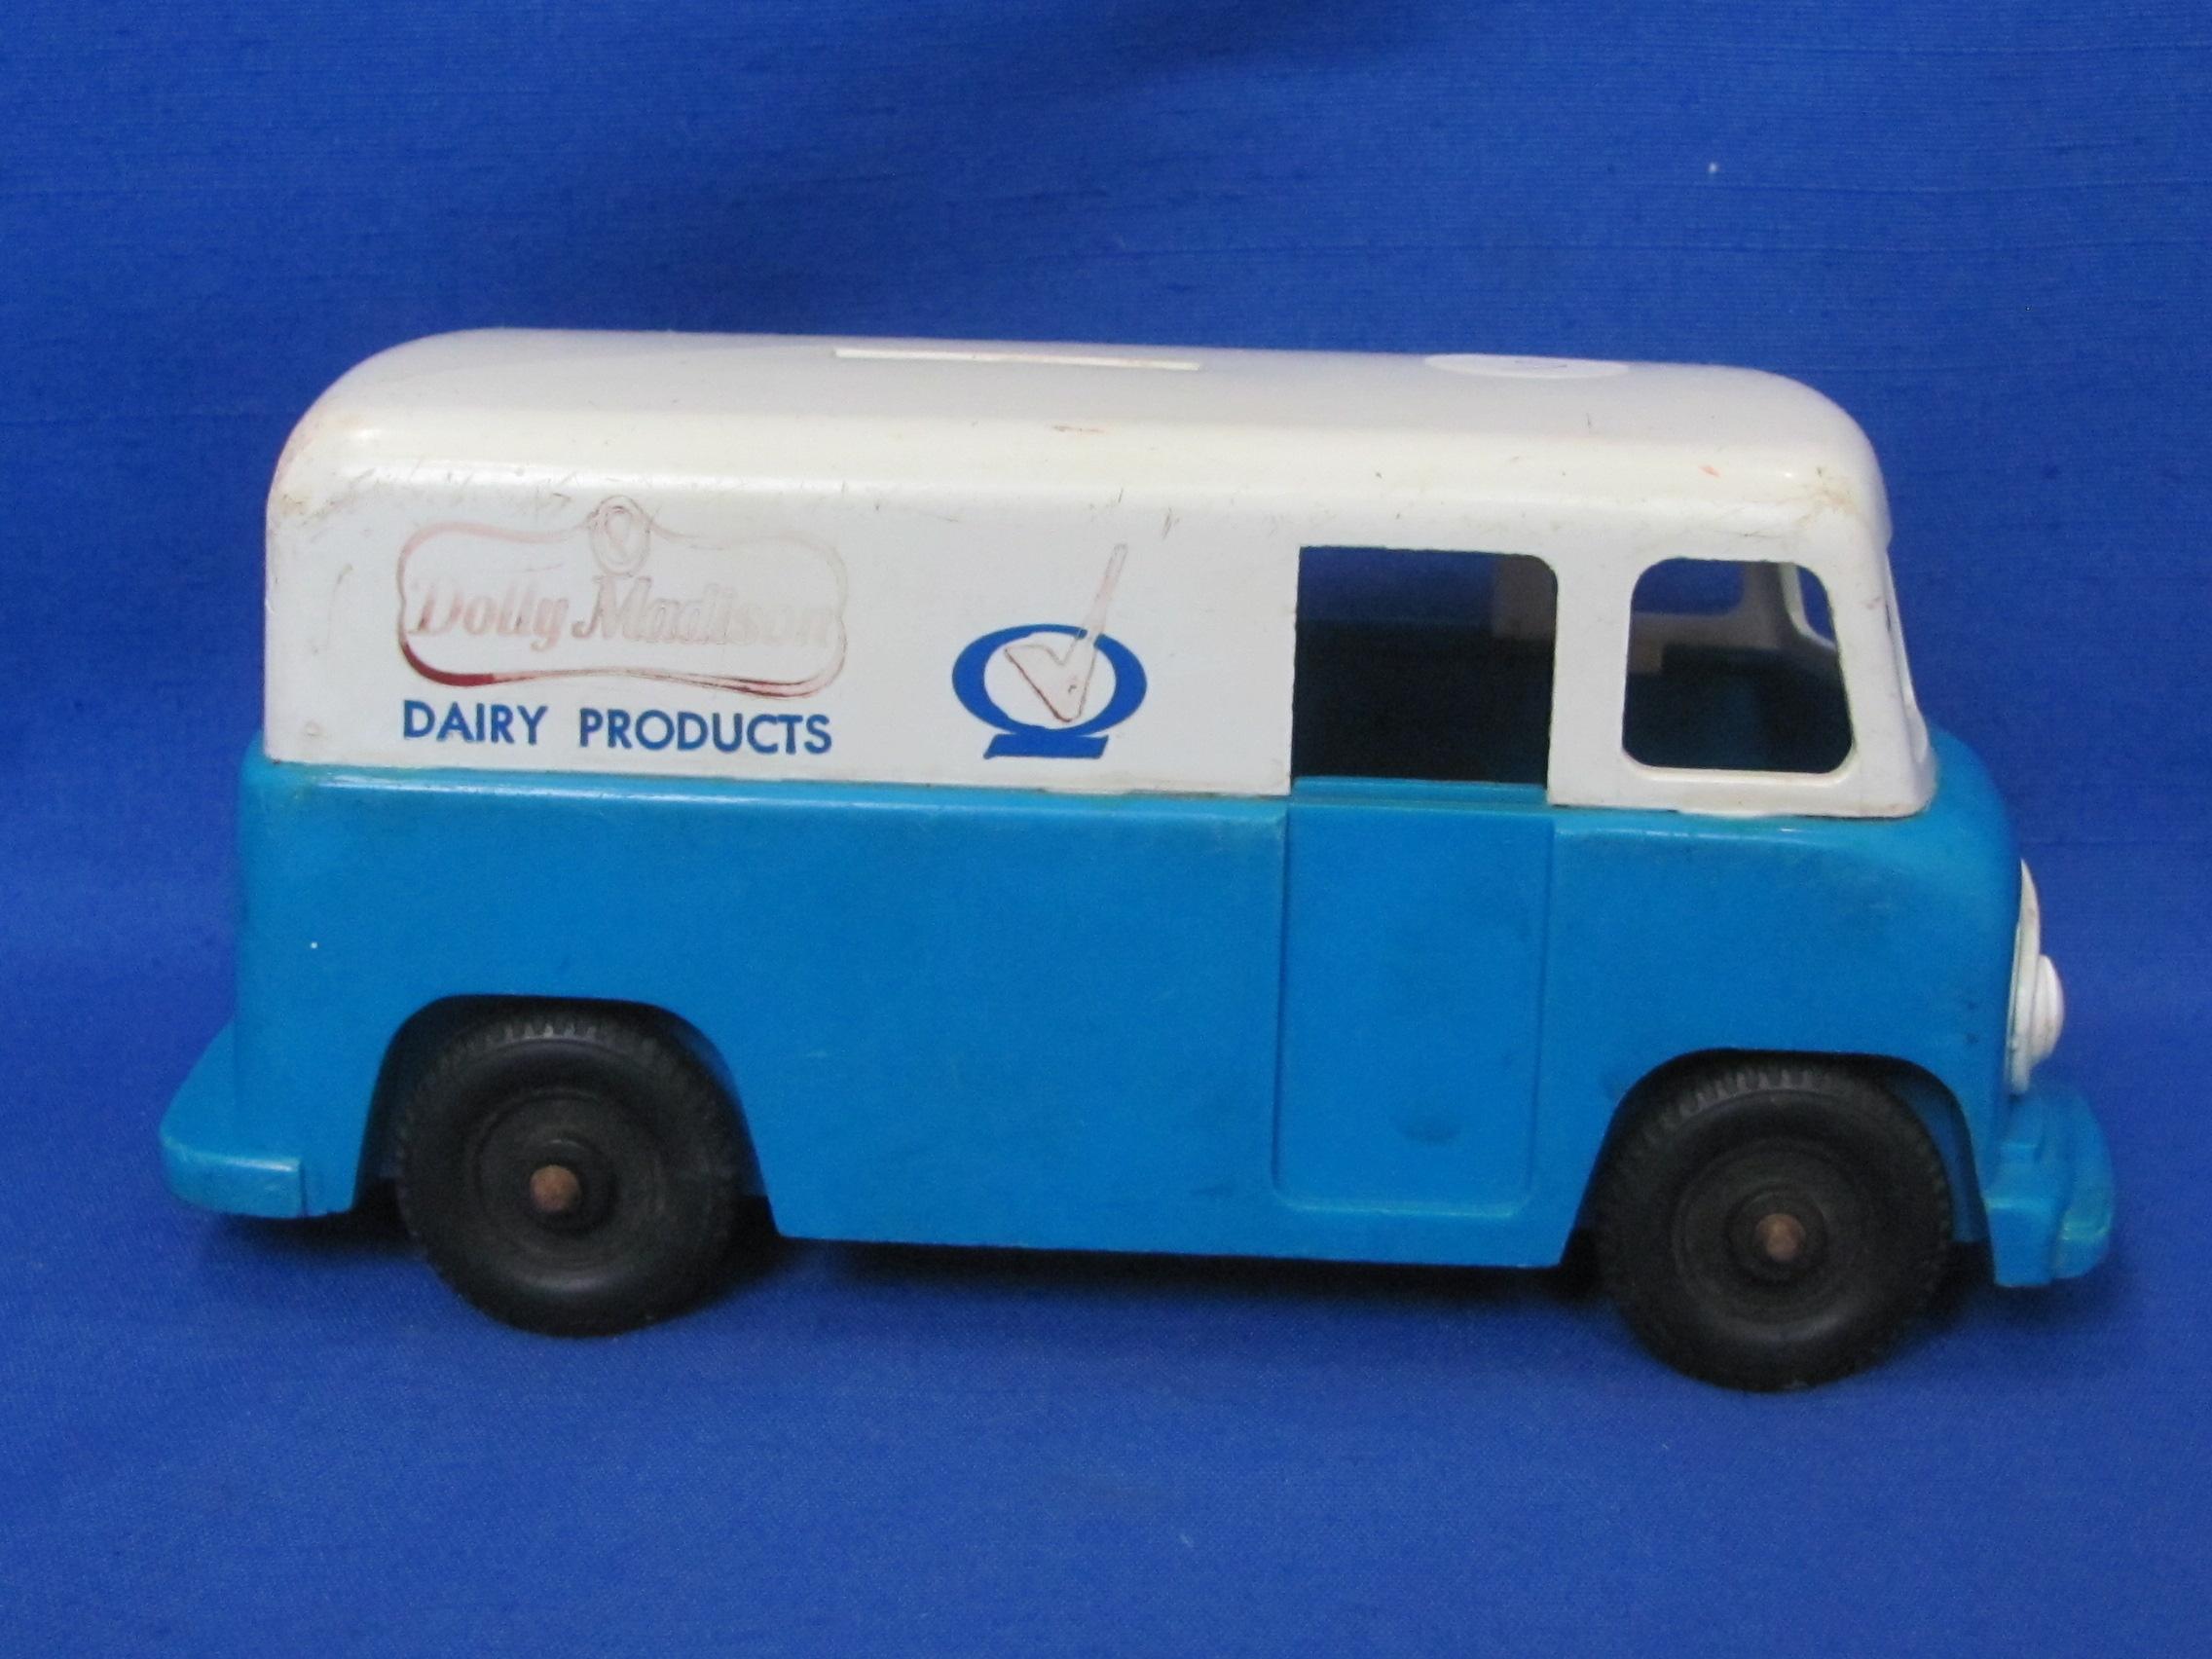 Plastic Bank – Truck for “Dolly Madison Dairy Products” - 7” long – Some damage